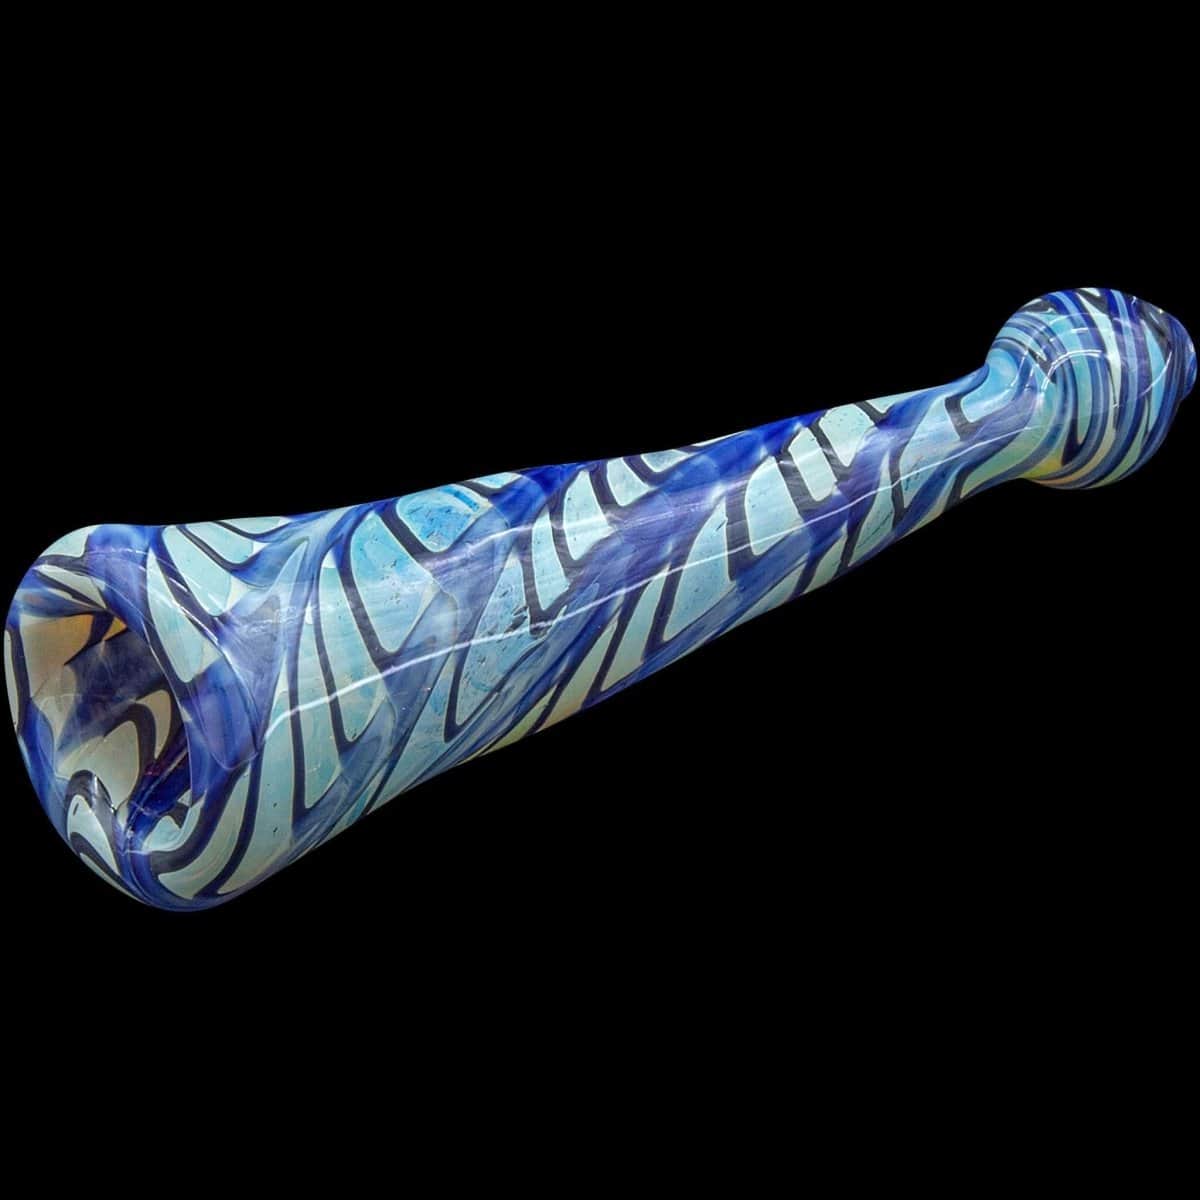 LA Pipes Hand Pipe Blue "Typhoon" Colored Chillum